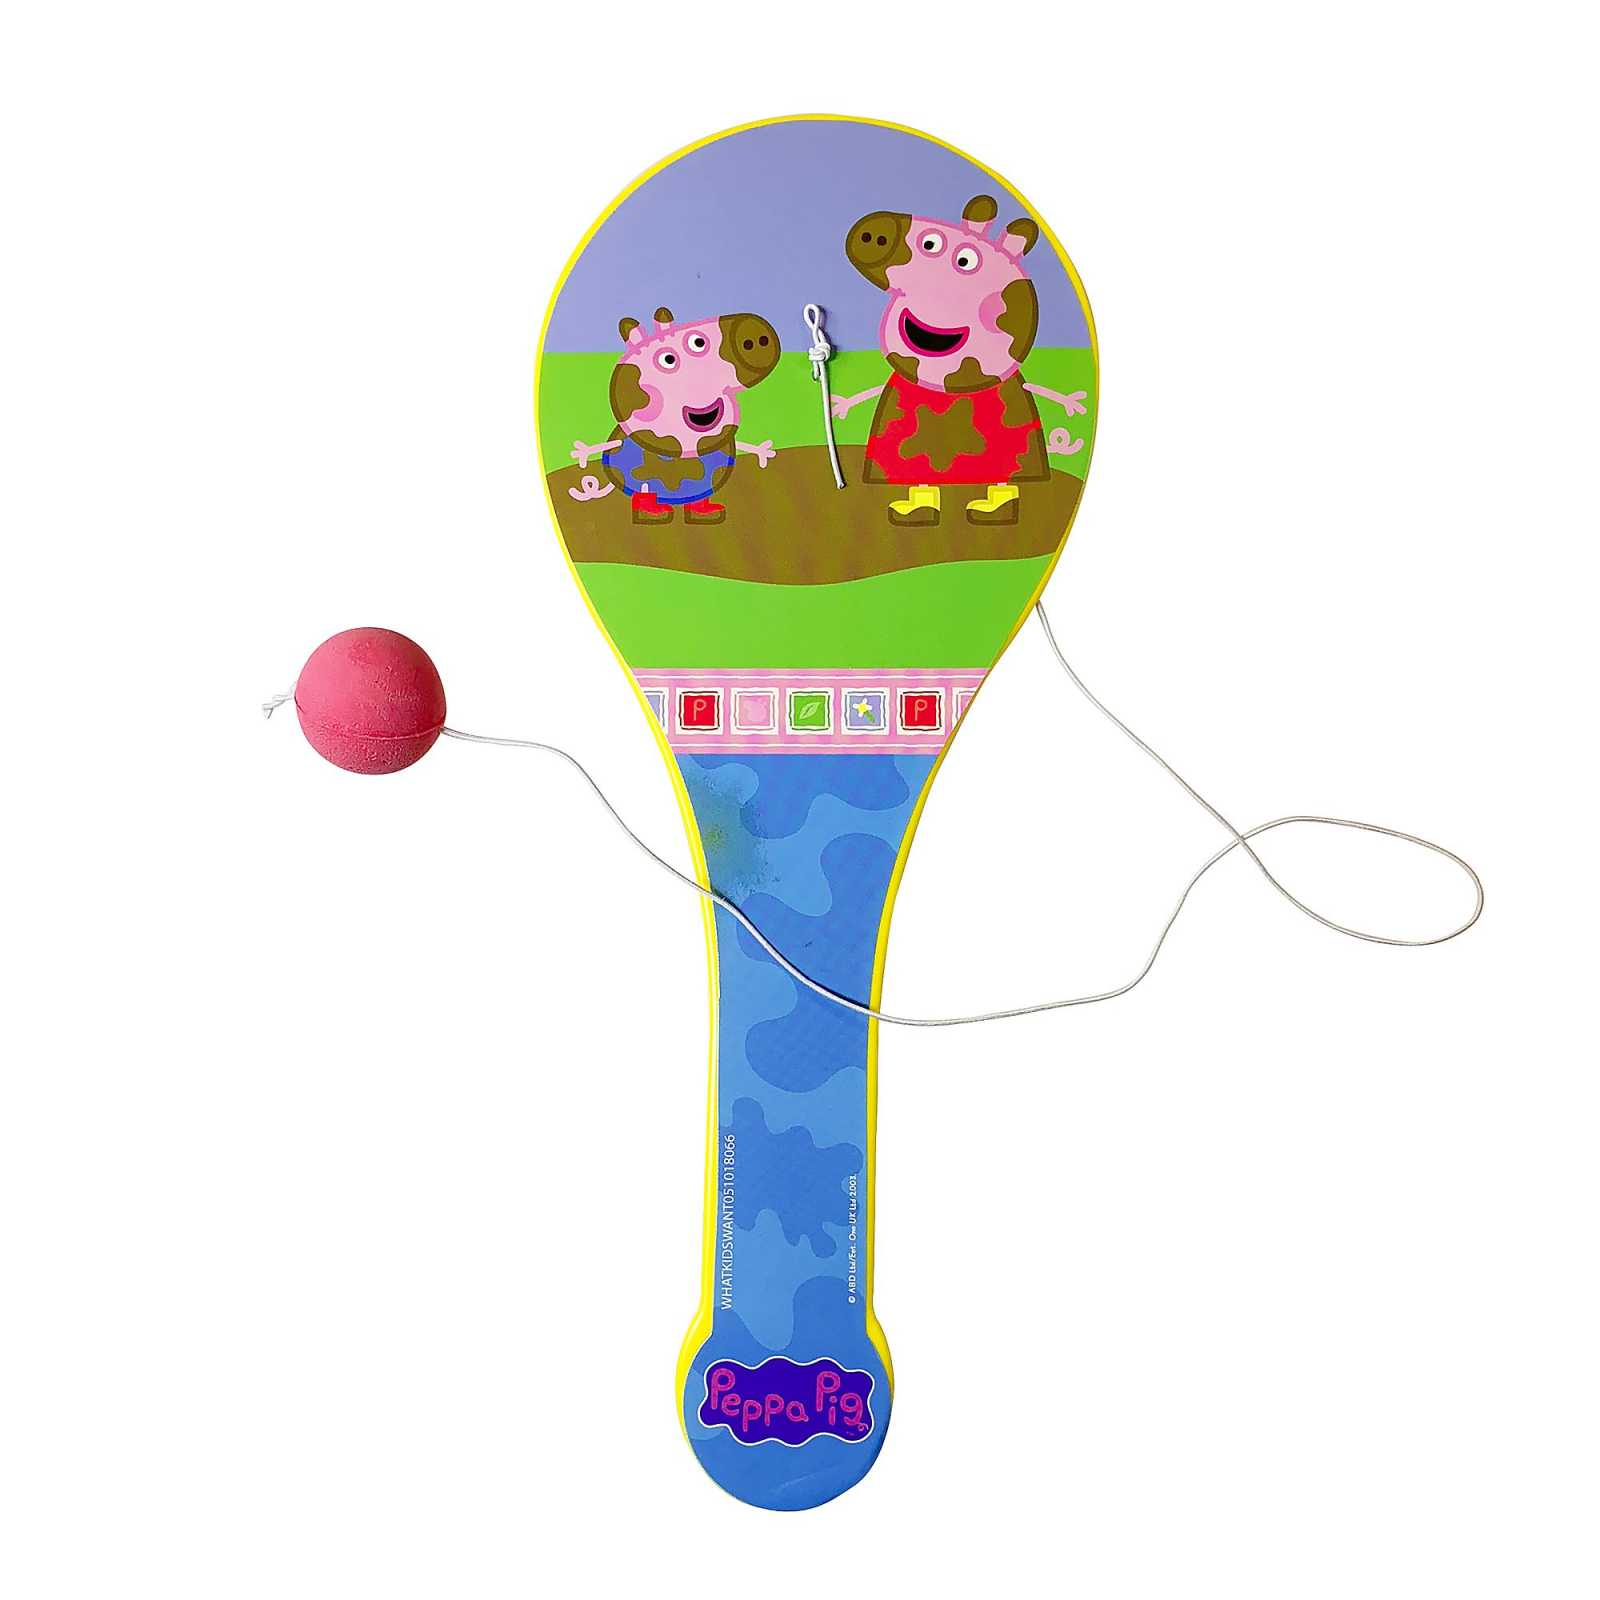 Nickelodeon Peppa Pig Paddle Ball Indoor Outdoor Family Travel Toy Game